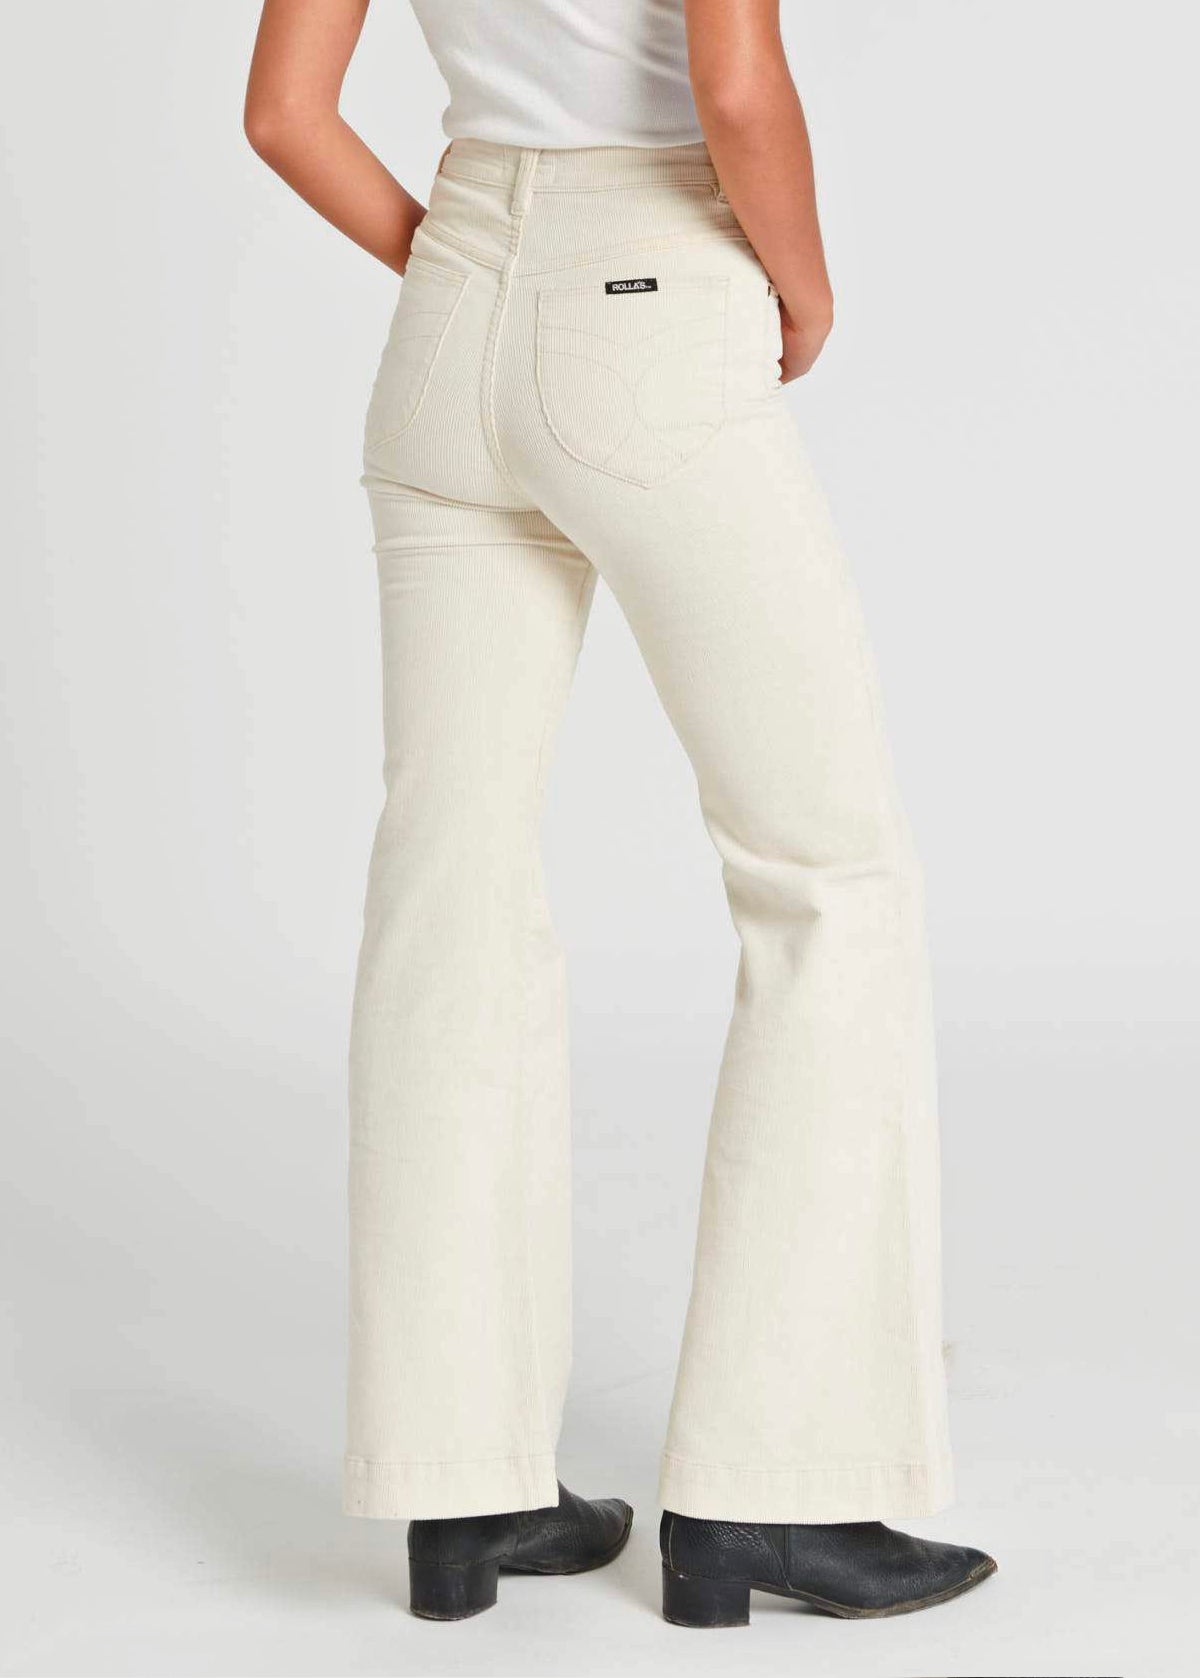 The Vanilla Cream Eastcoast Corduroy Flares by Rolla's Jeans. 70s inspired and features a high Rise waist, bell bottom leg, all in a vanilla cream corduroy